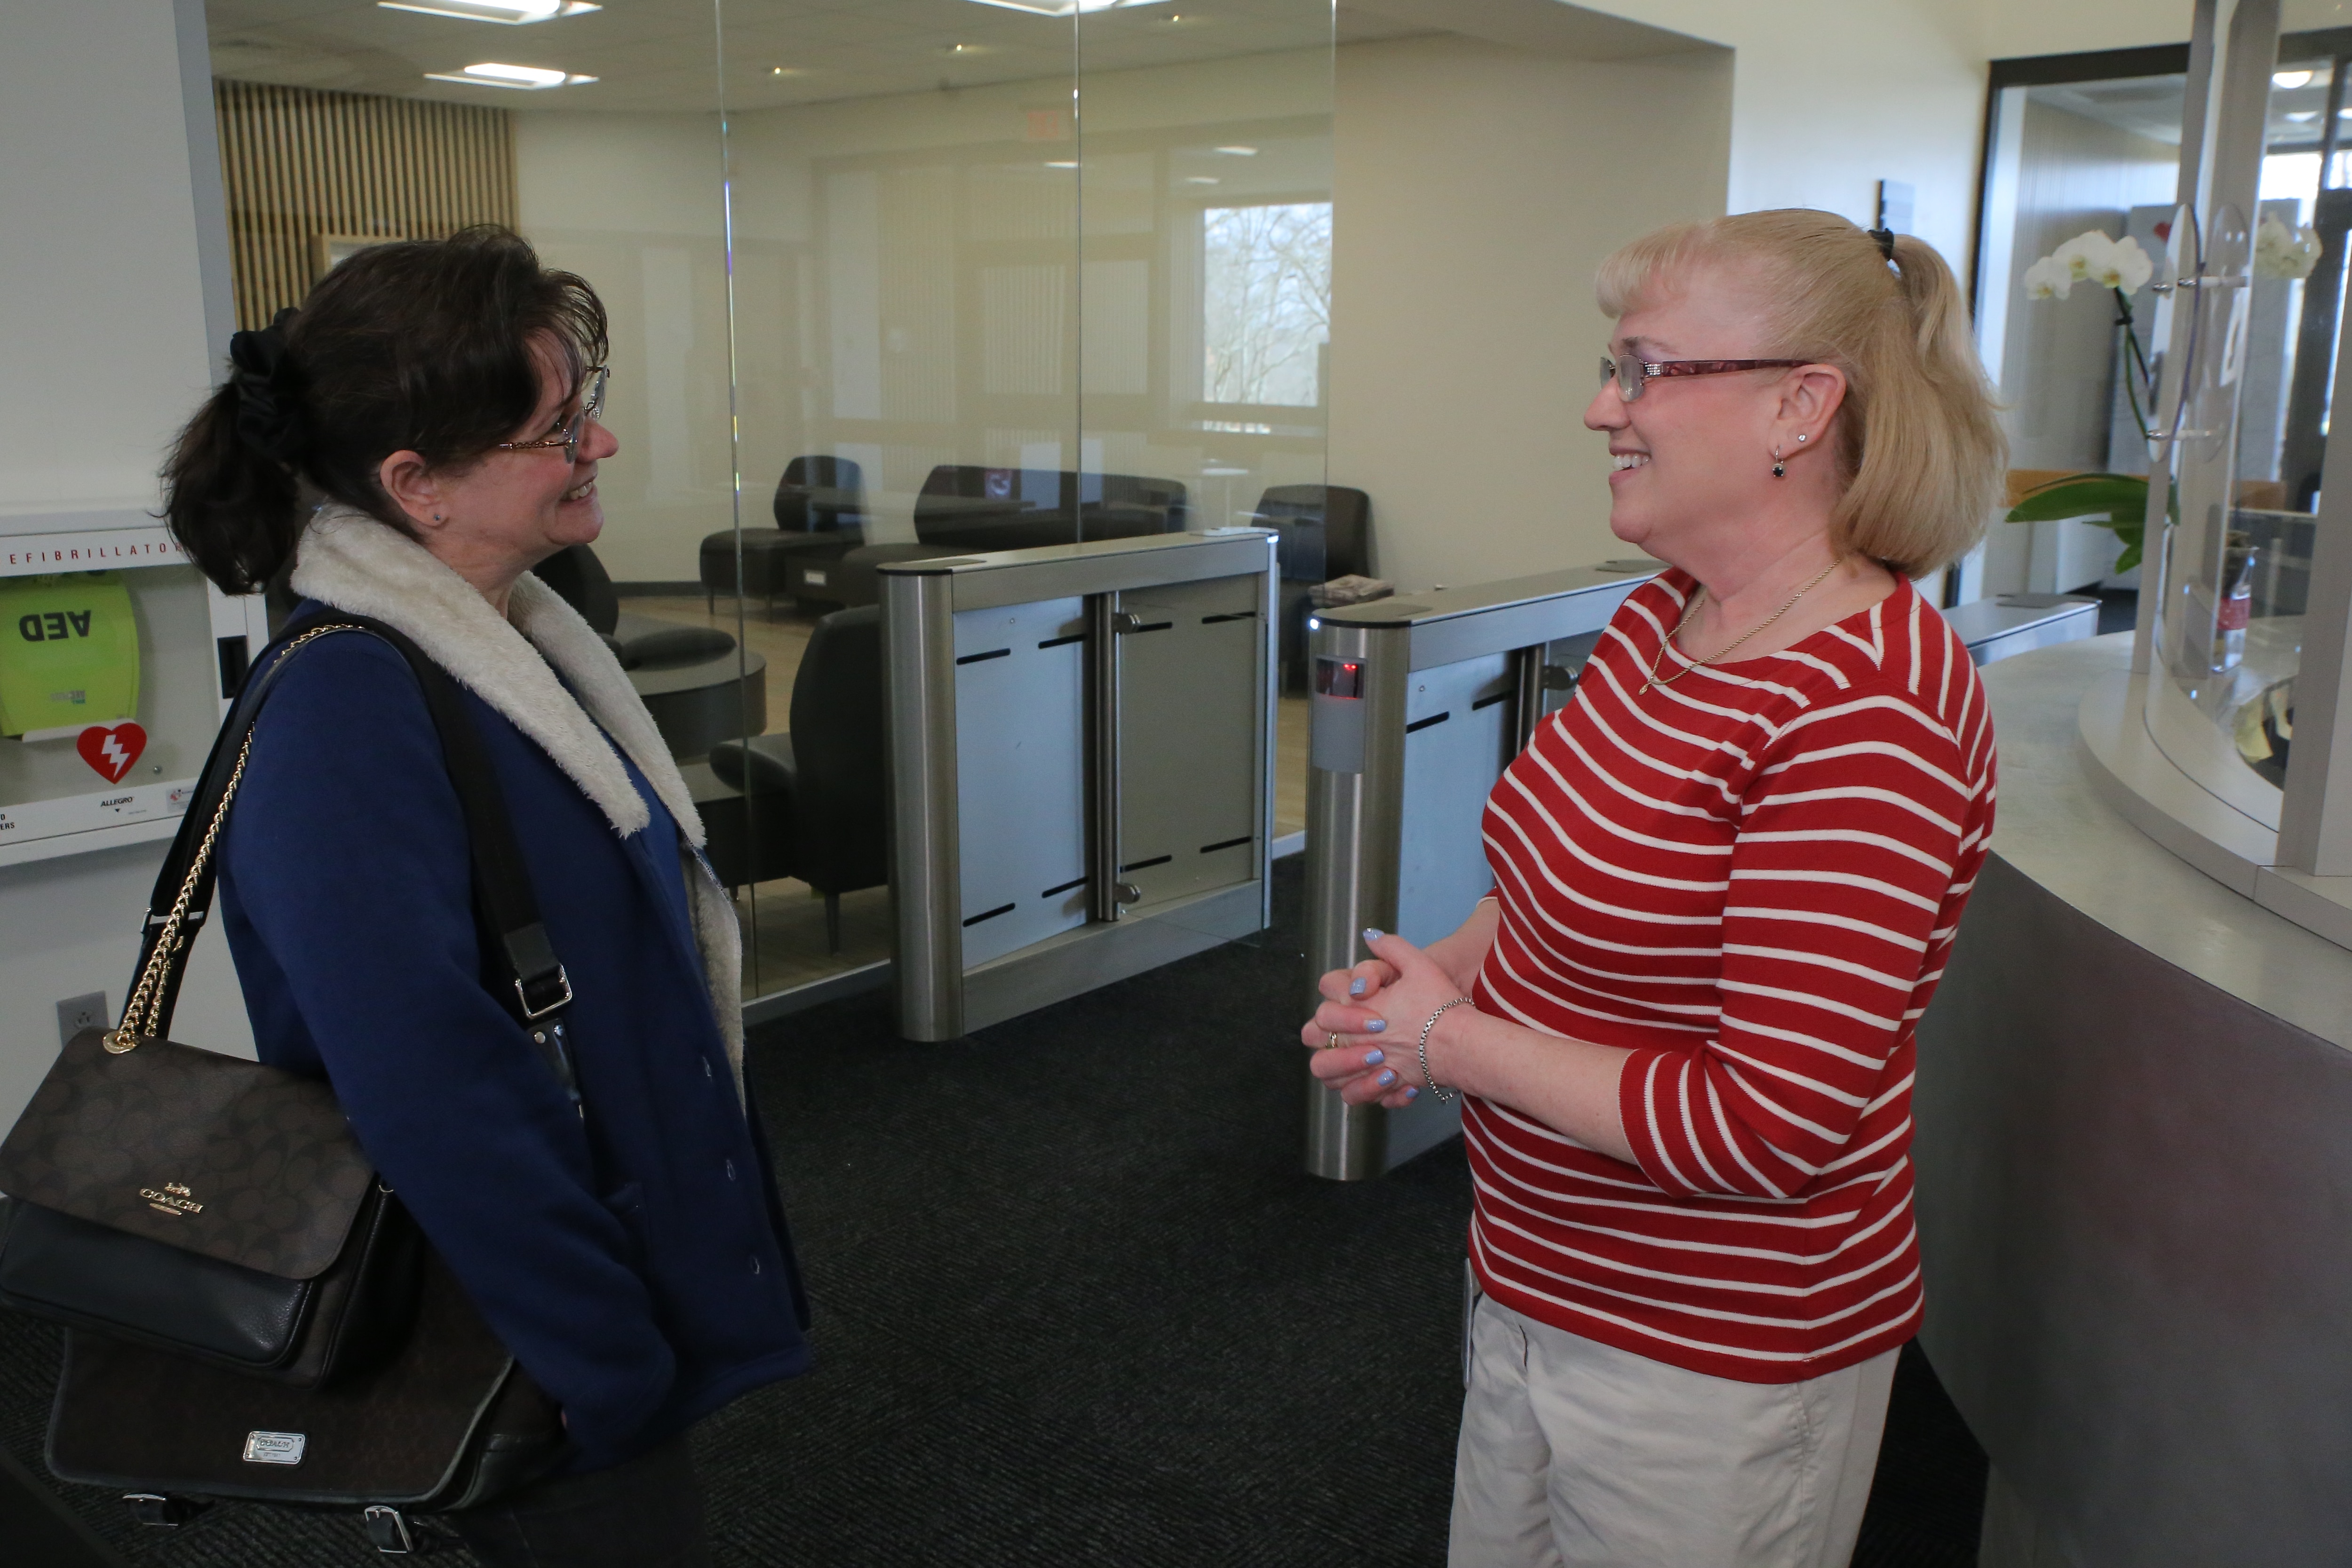 CVS Health colleagues Lea Bousquet and Therese Switzer talk in the office